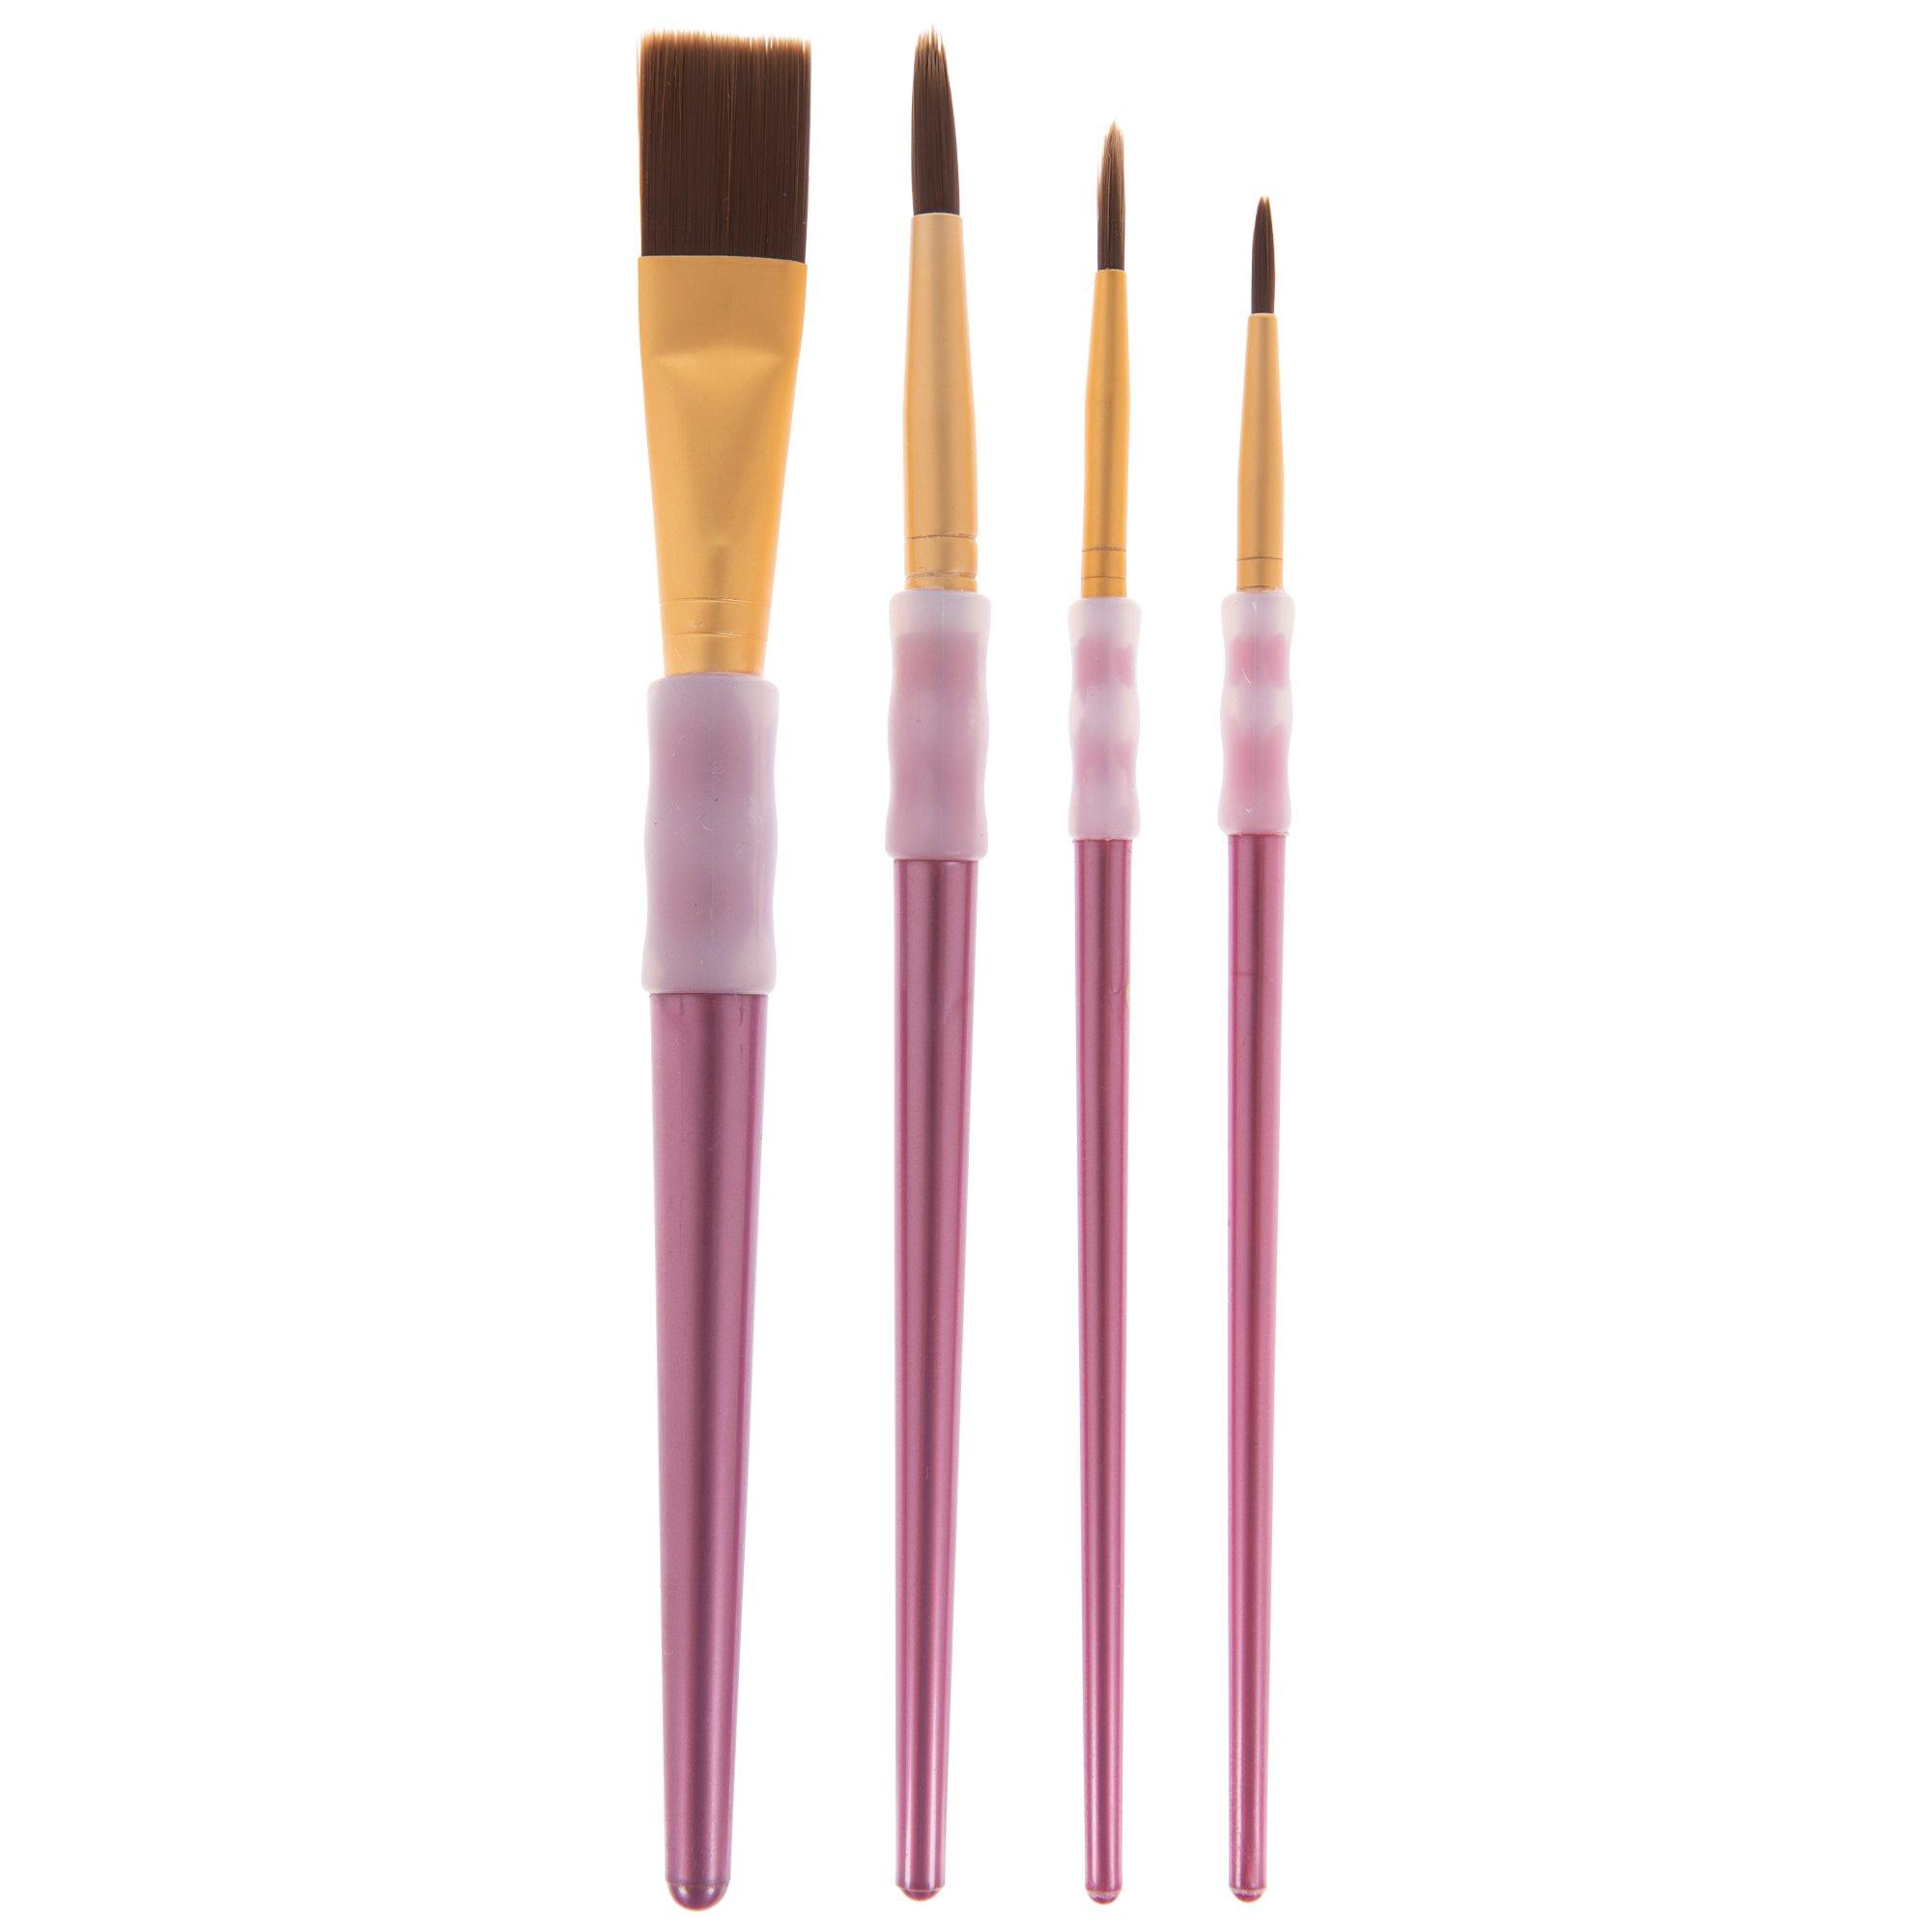 Round All Purpose Paint Brushes Value Pack - 12 Piece Set